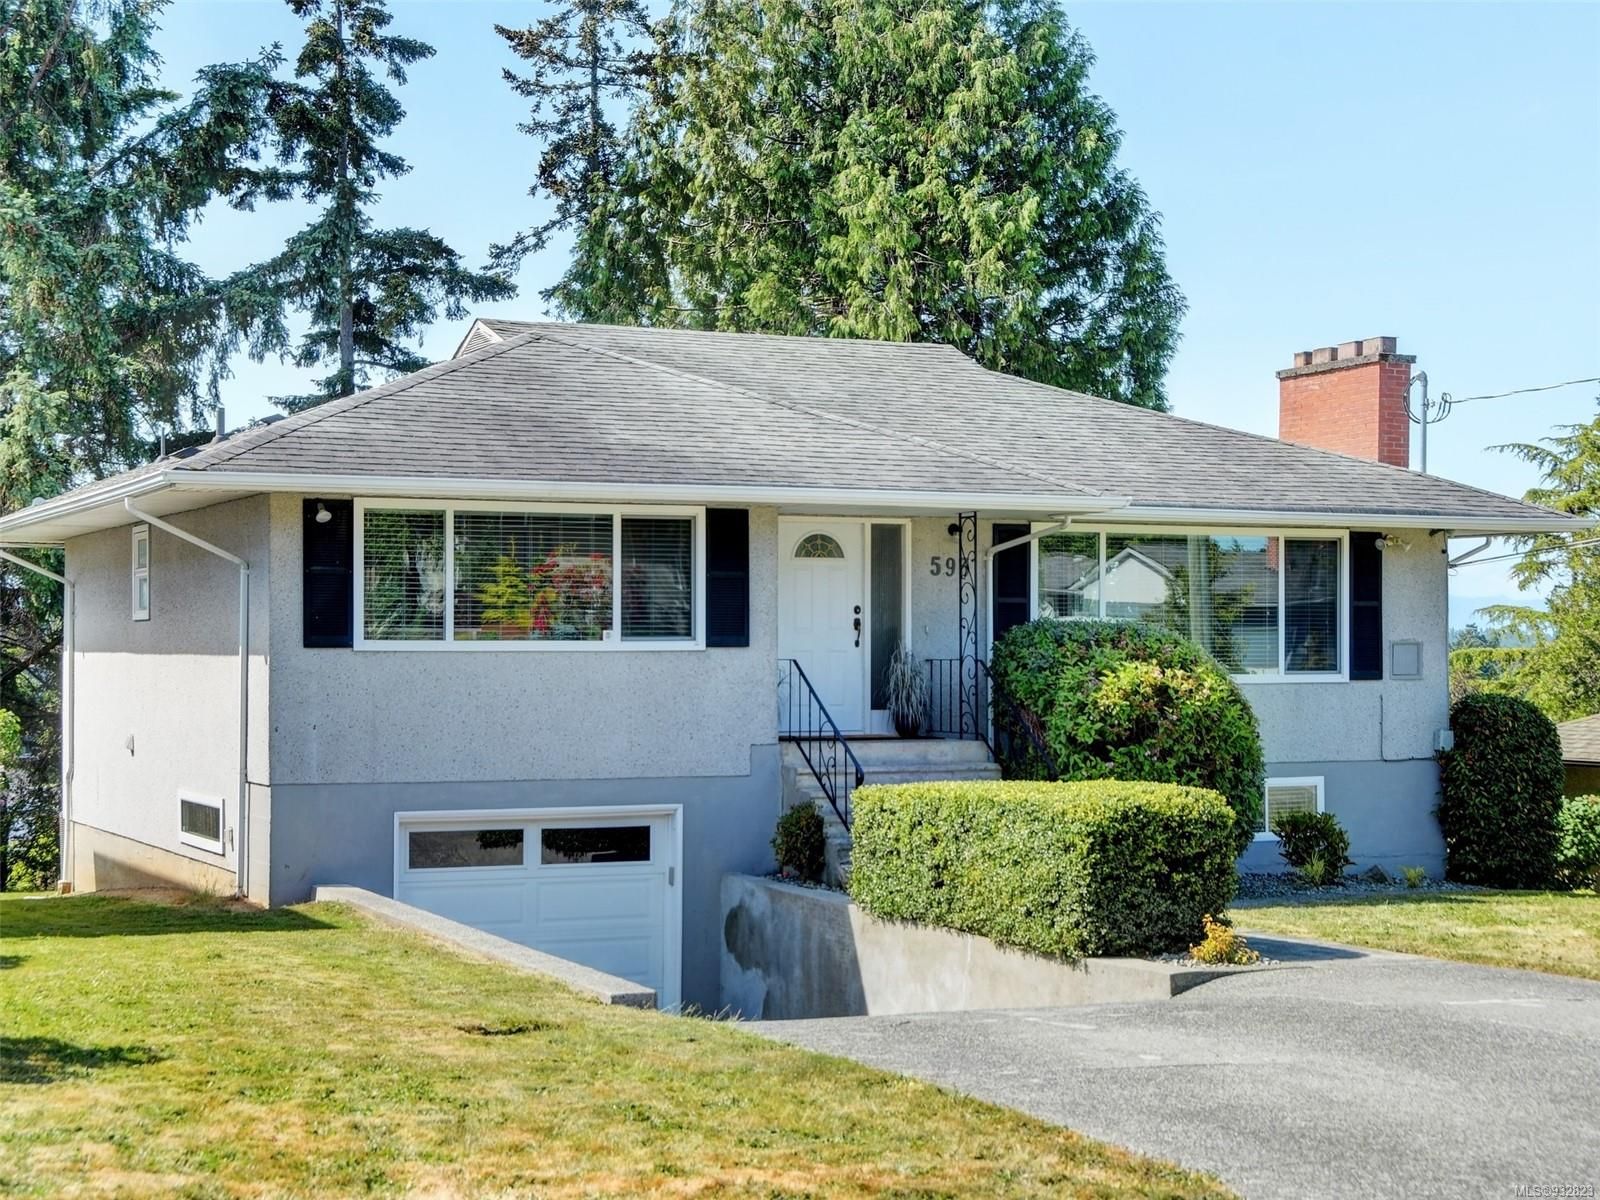 New property listed in SW Glanford, Saanich West